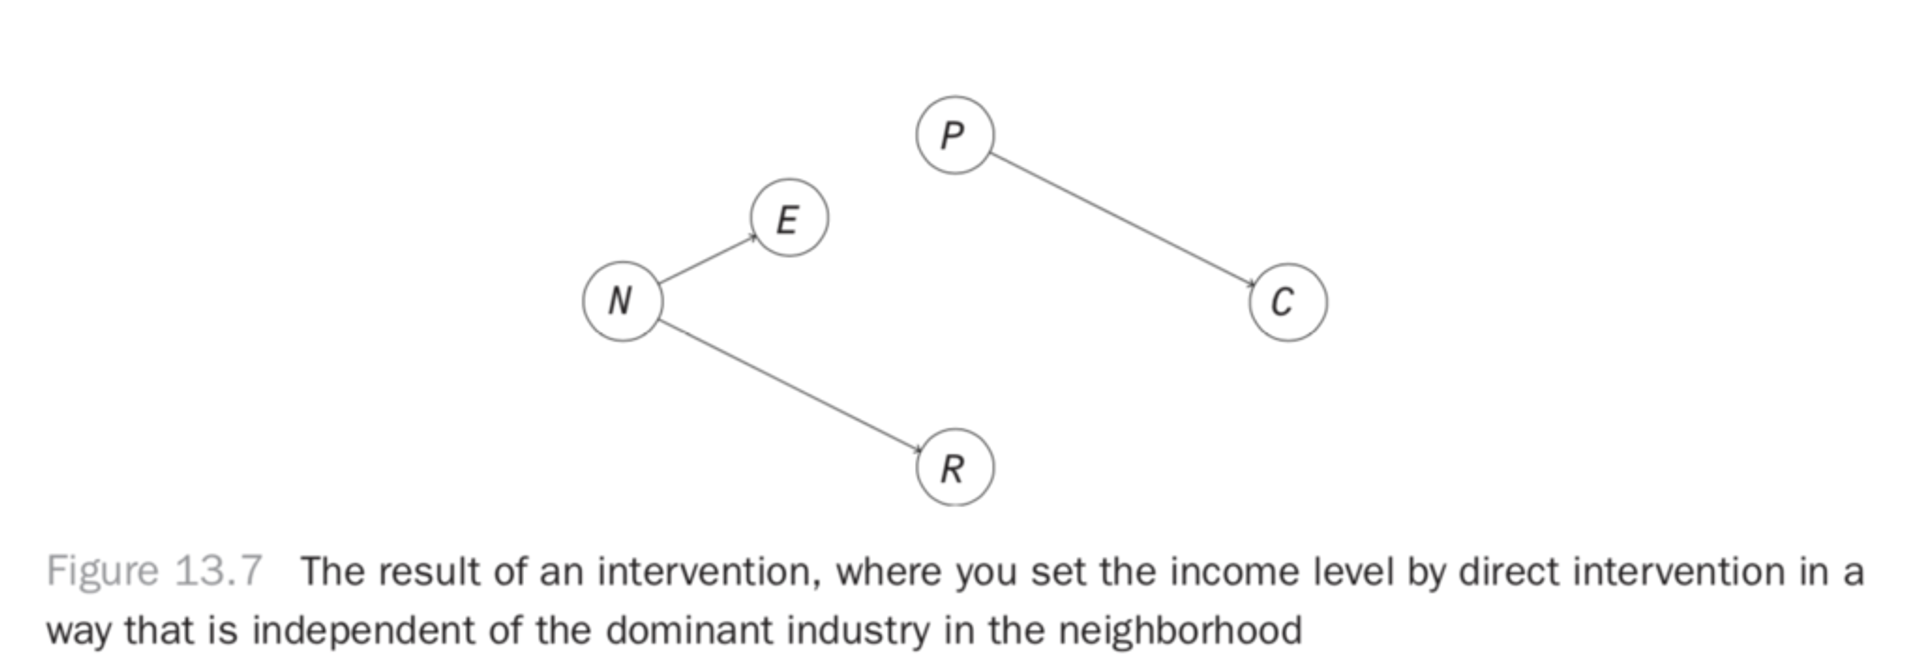 The result of an intervention where you set the income level by direct intervention in a way that is independent of the dominant industry in the neighborhood